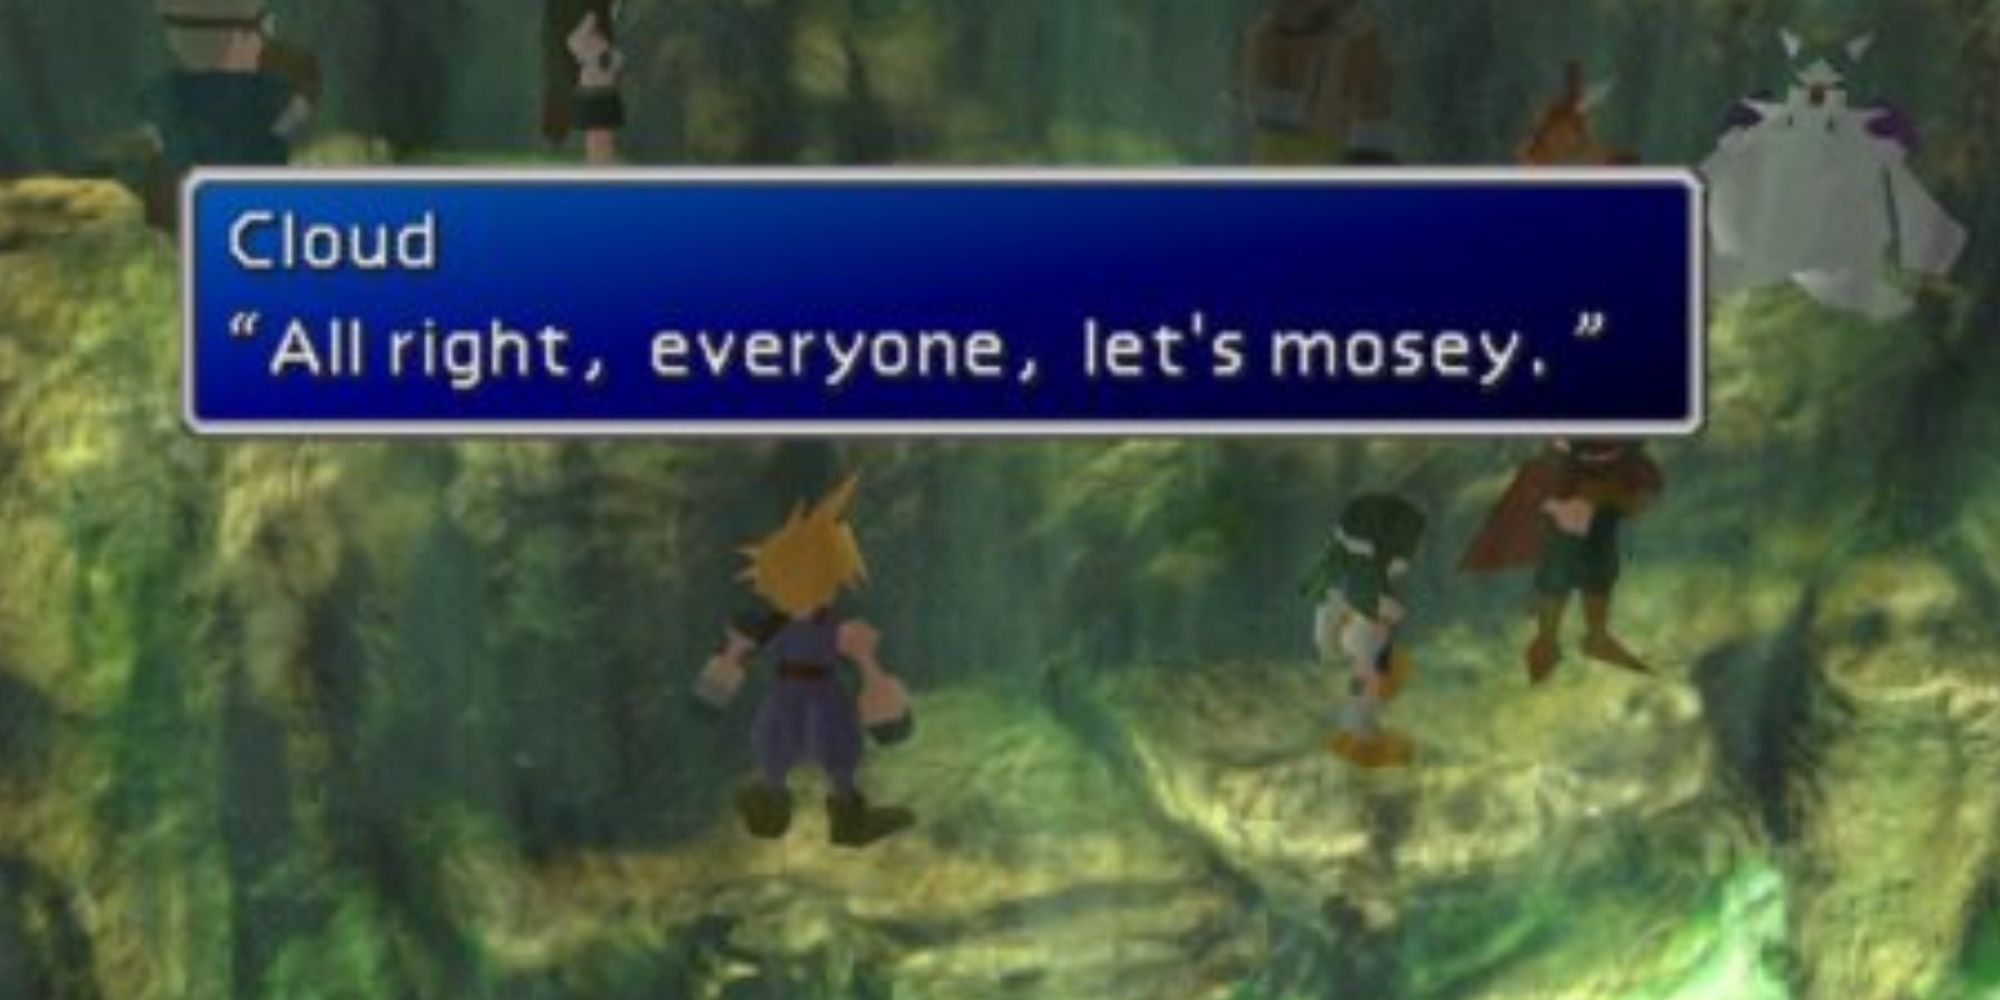 Cloud in Final Fantasy 7 saying "let's mosey" during an otherwise dramatic moment.